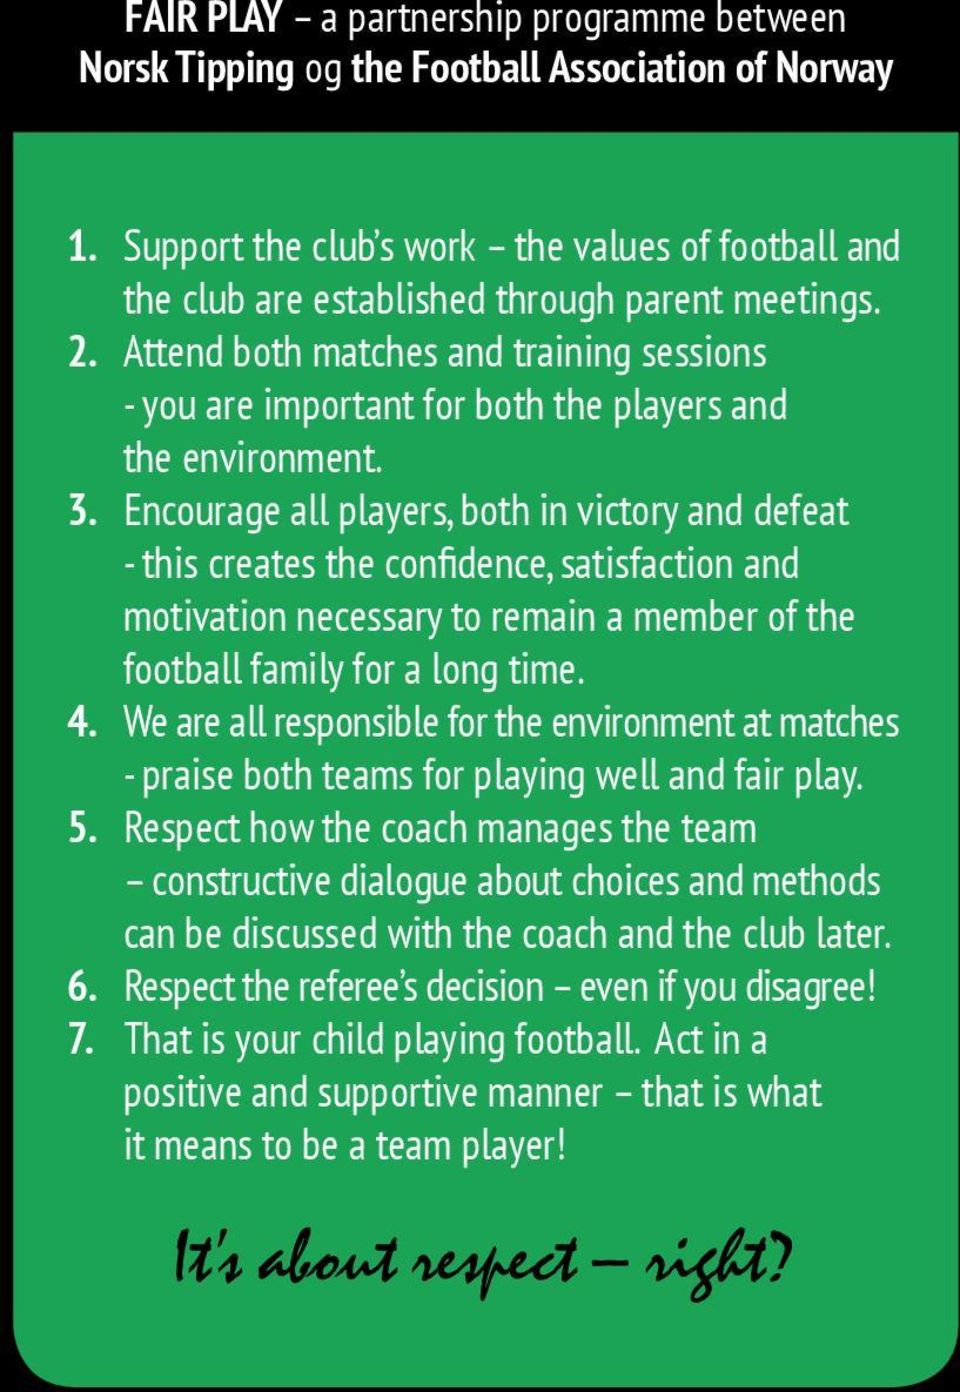 Encourage all players, both in victory and defeat - this creates the confidence, satisfaction and motivation necessary to remain a member of the football family for a long time. 4.